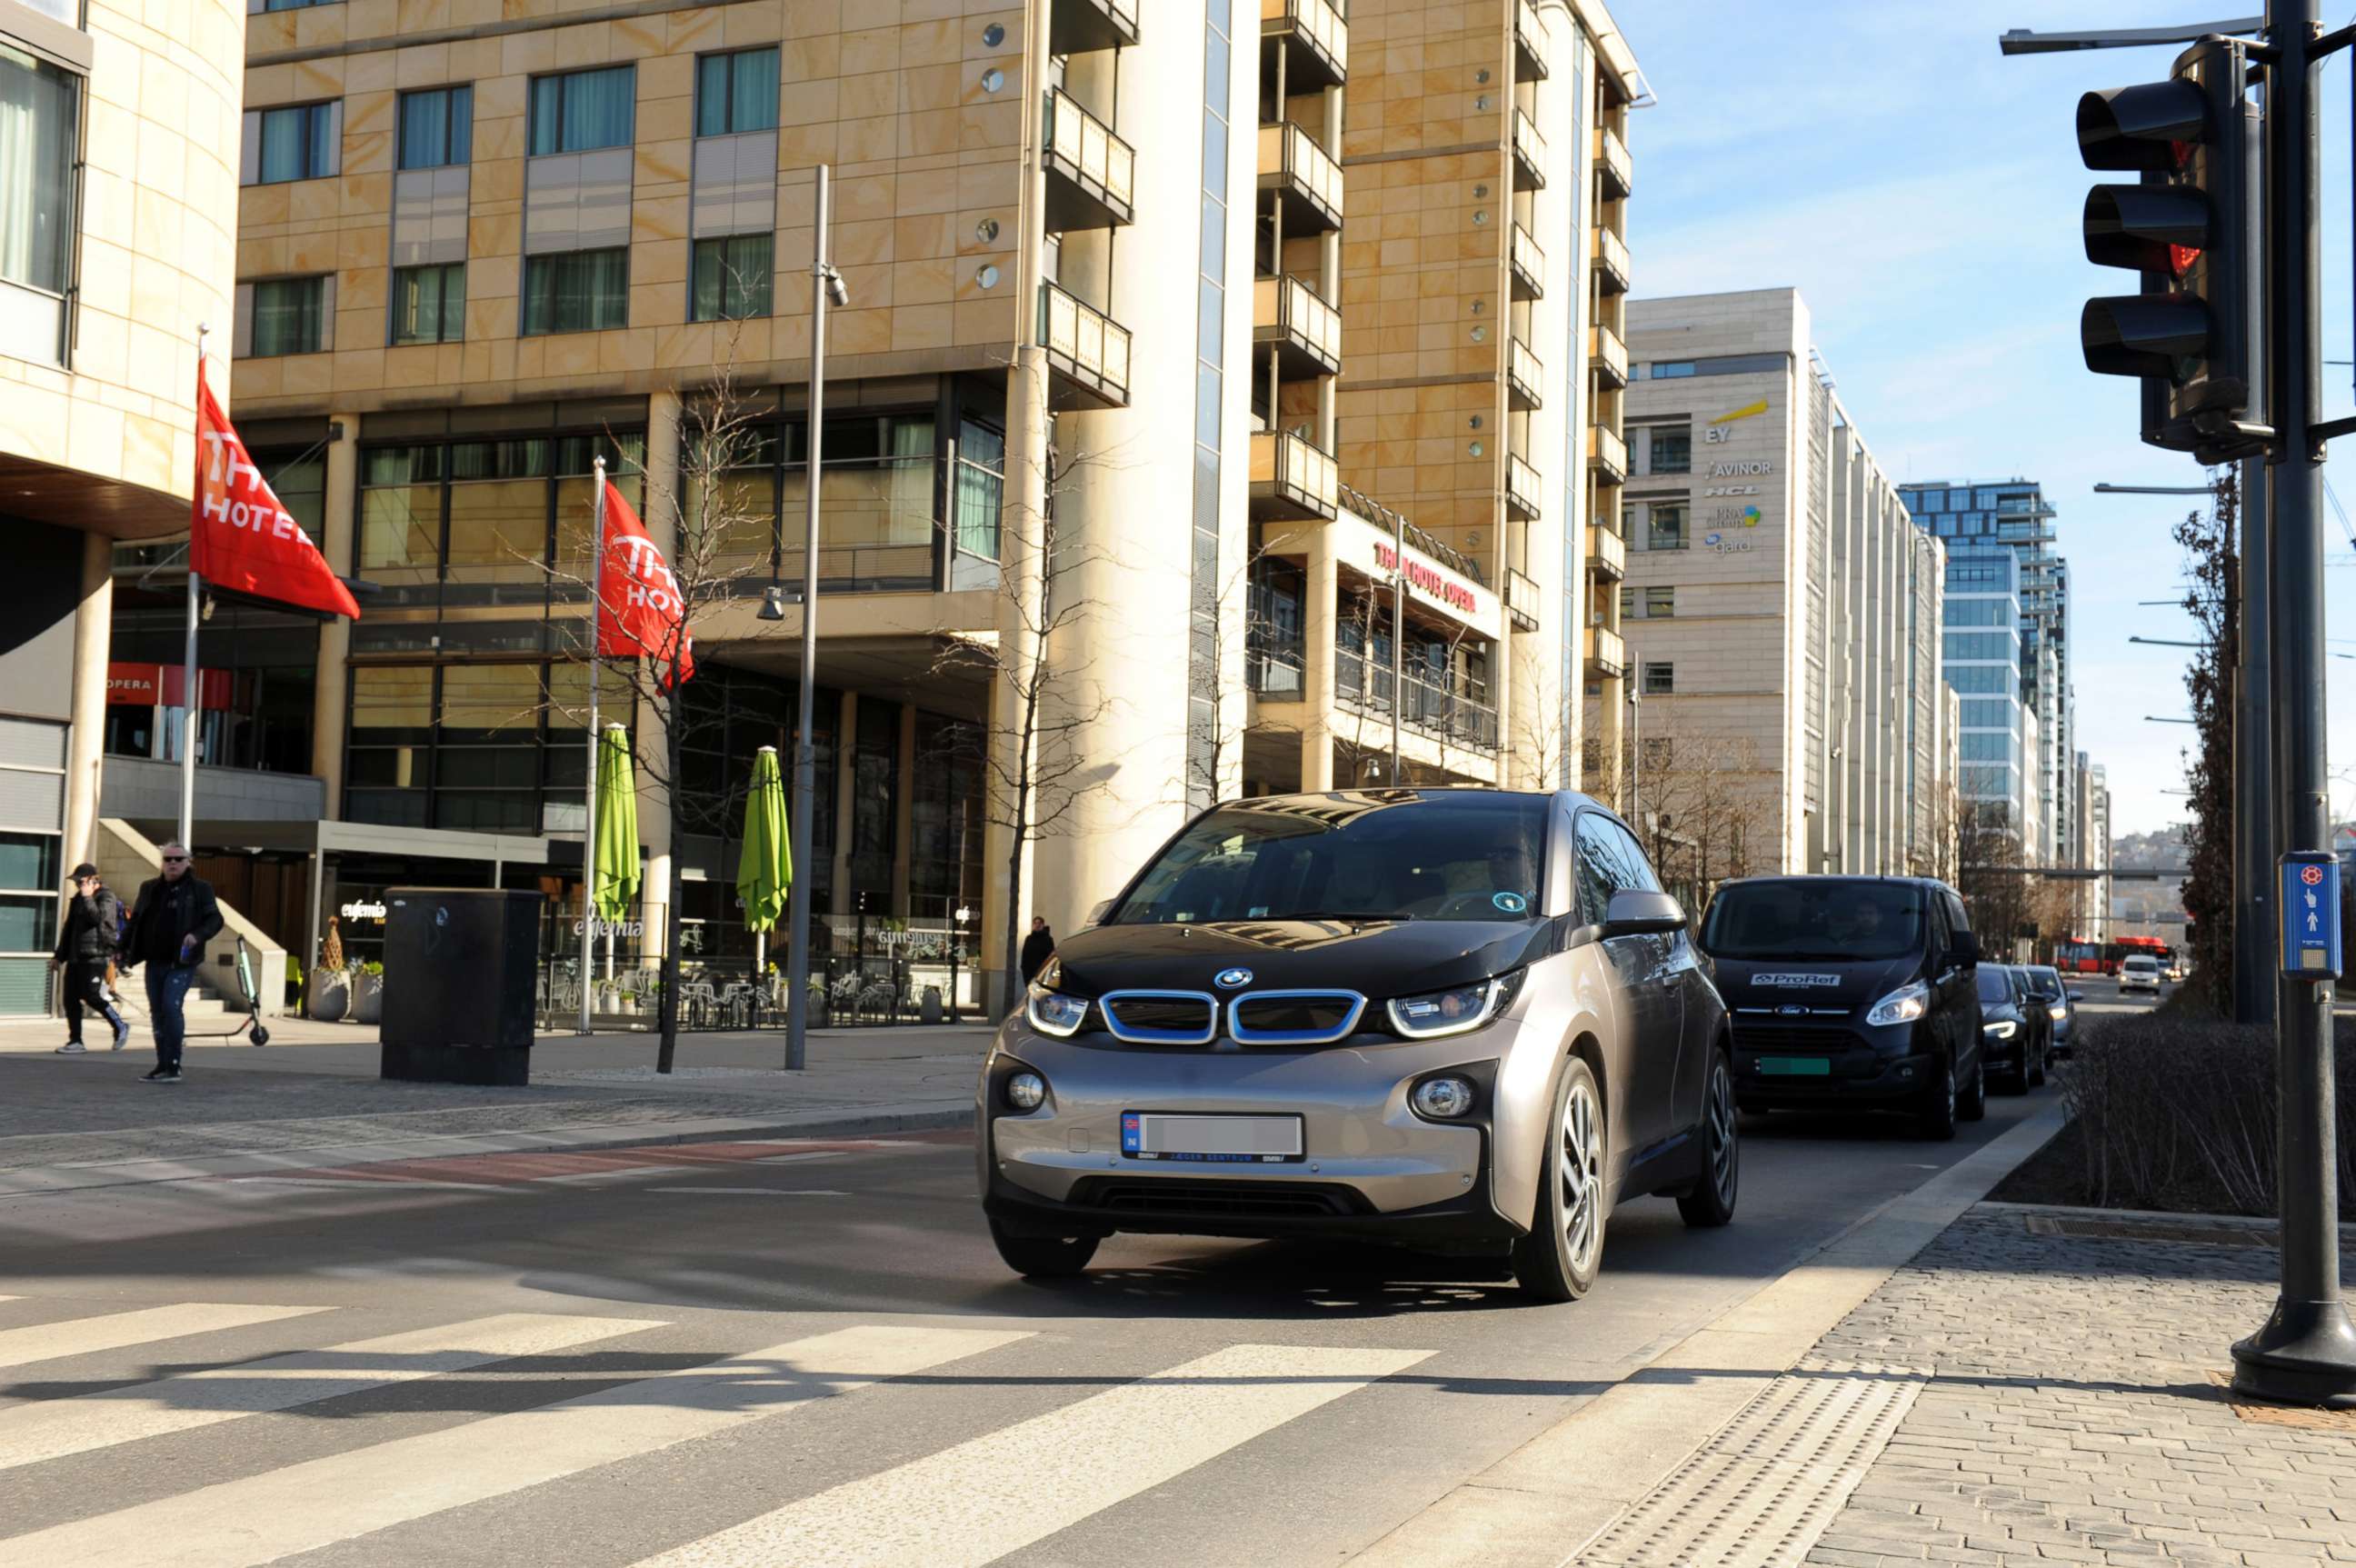 PHOTO: In this March 29, 2019, file photo, an electric car from BMW is shown on the street in downtown Oslo.